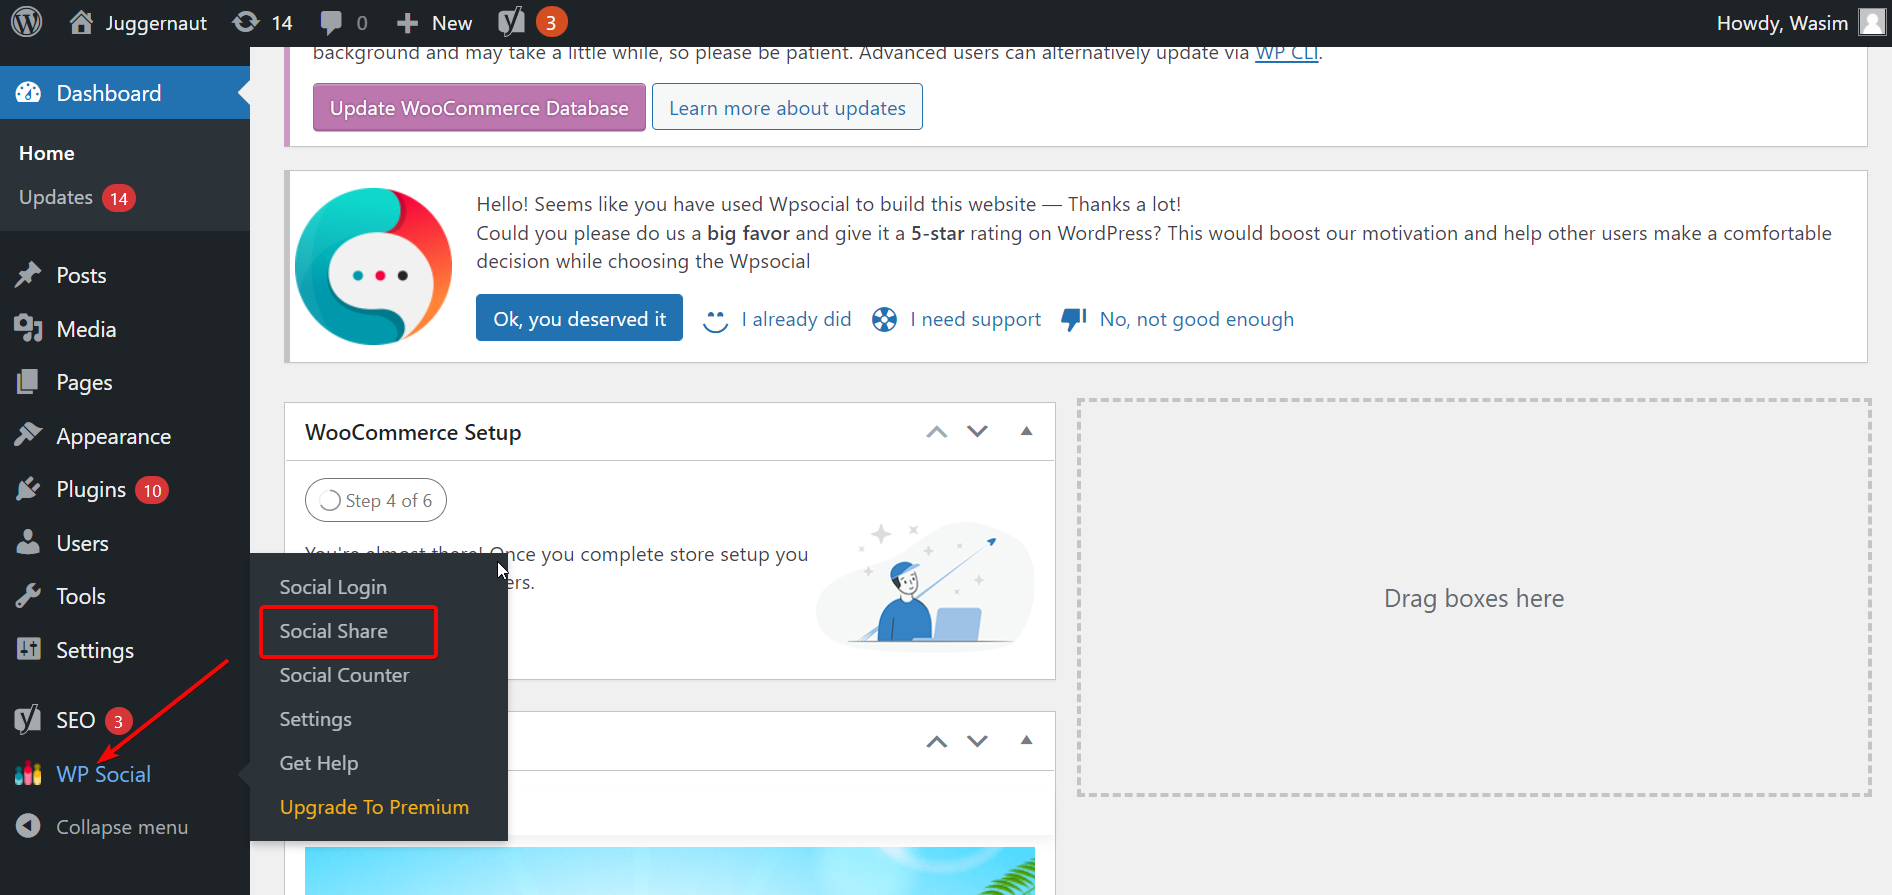 Navigate to social share from Wp Social to add social share buttons